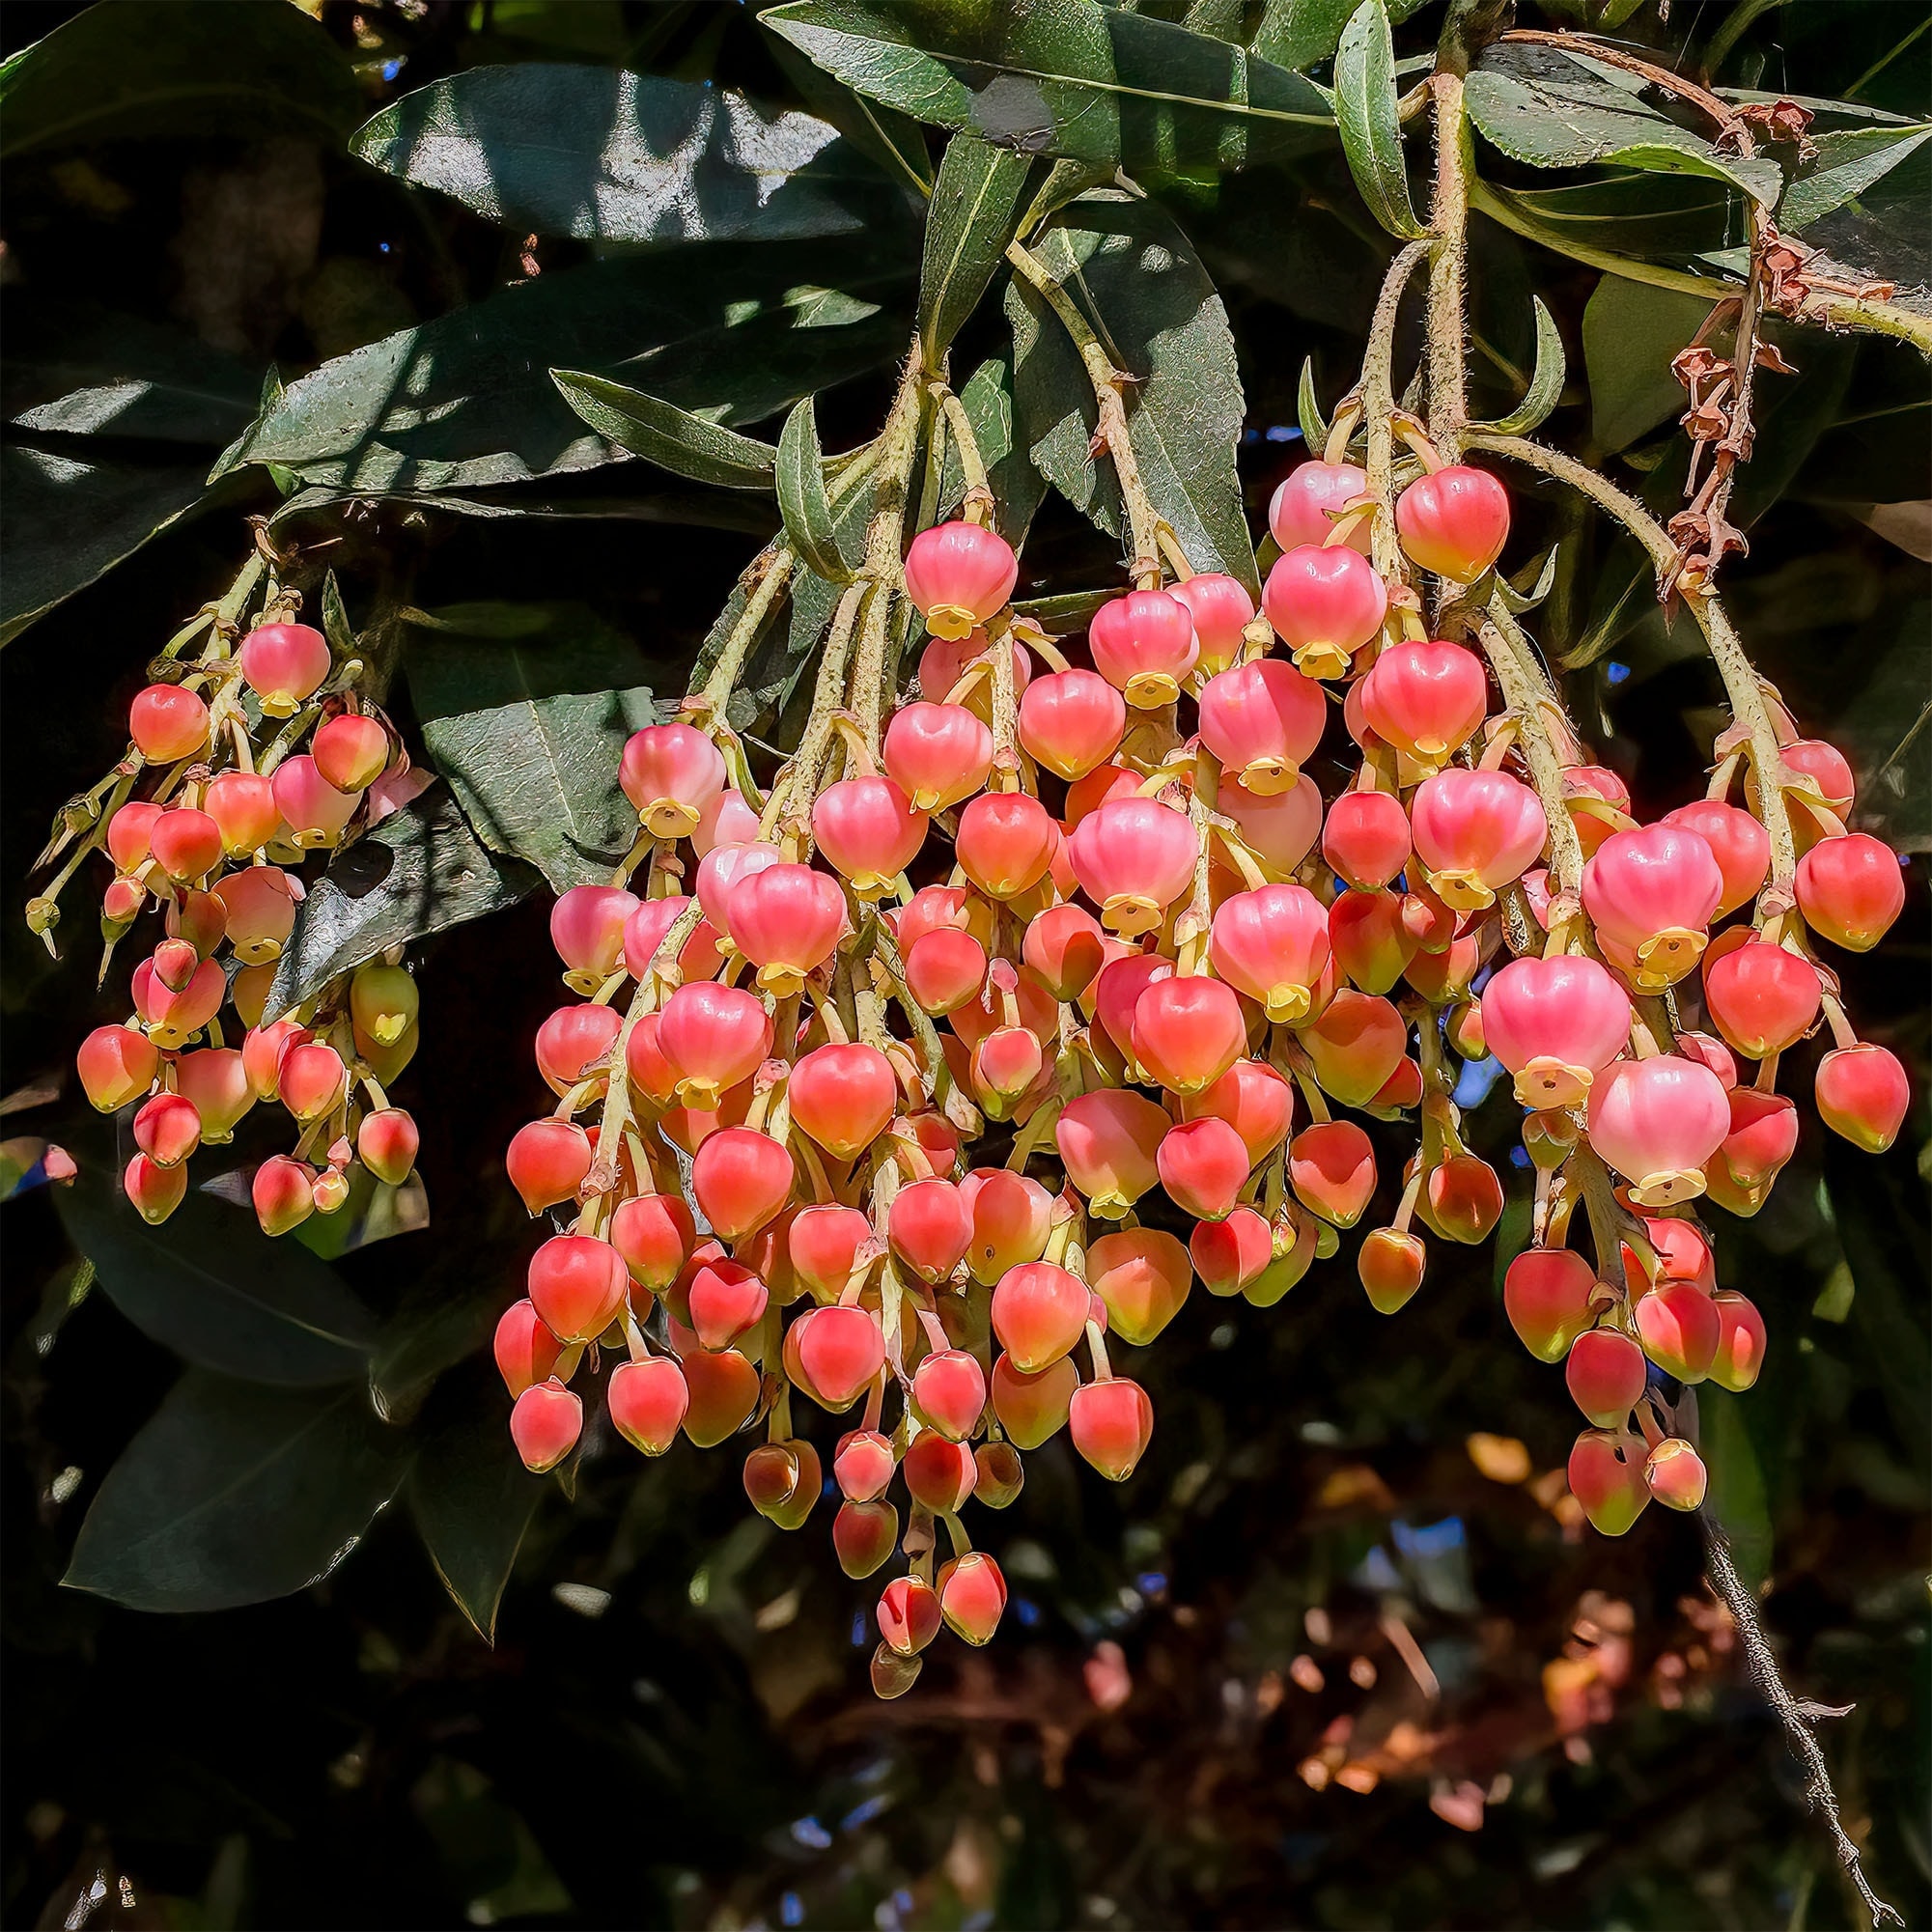 photo: flowers like sweet berries hanging in a cluster from this tree